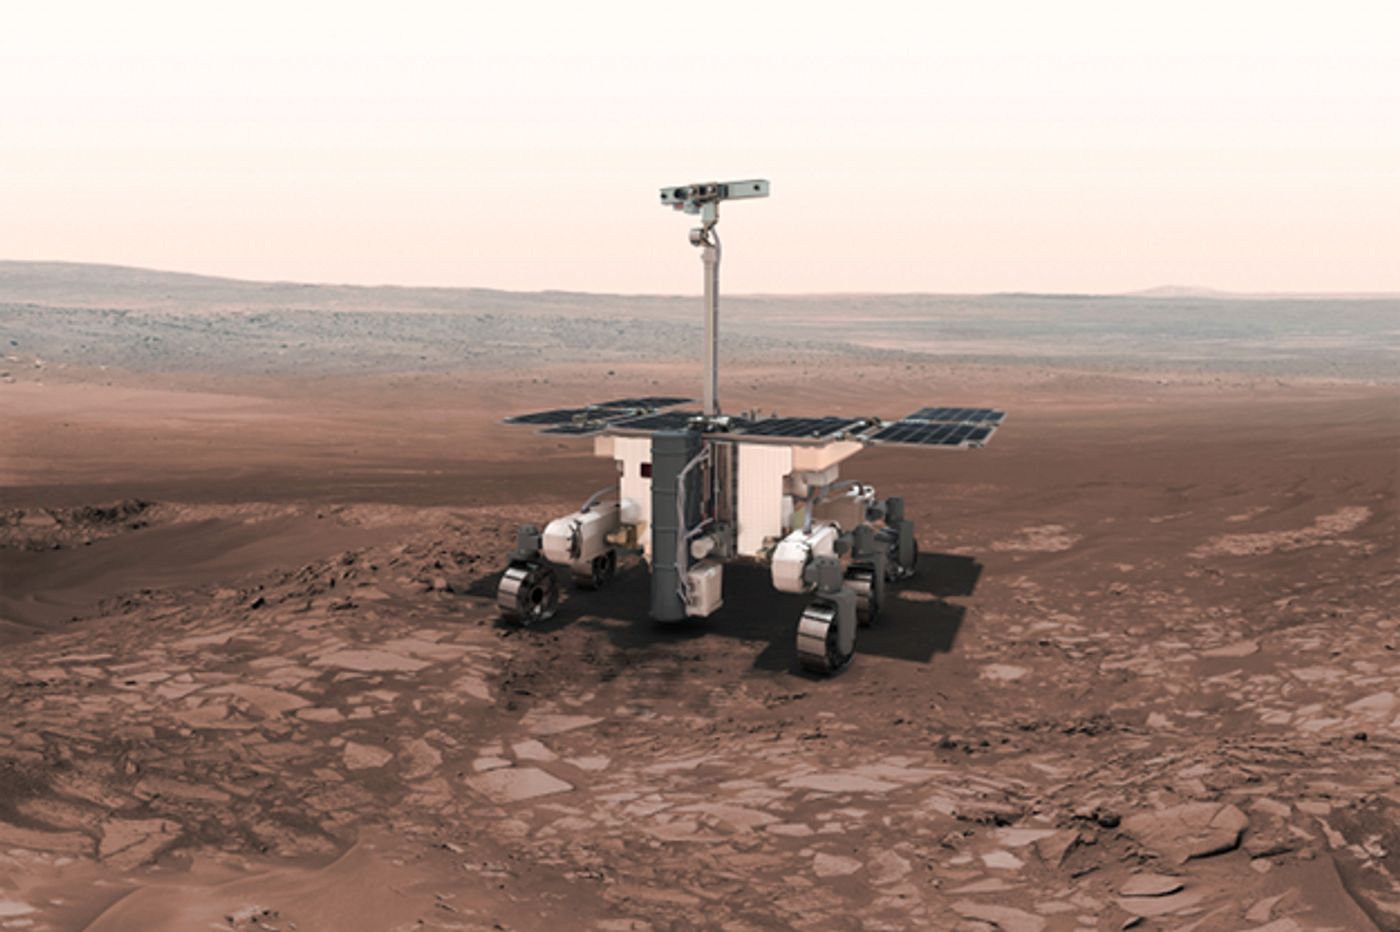 The ExoMars 2020 rover will be carried to Mars on a Russian surface platform.